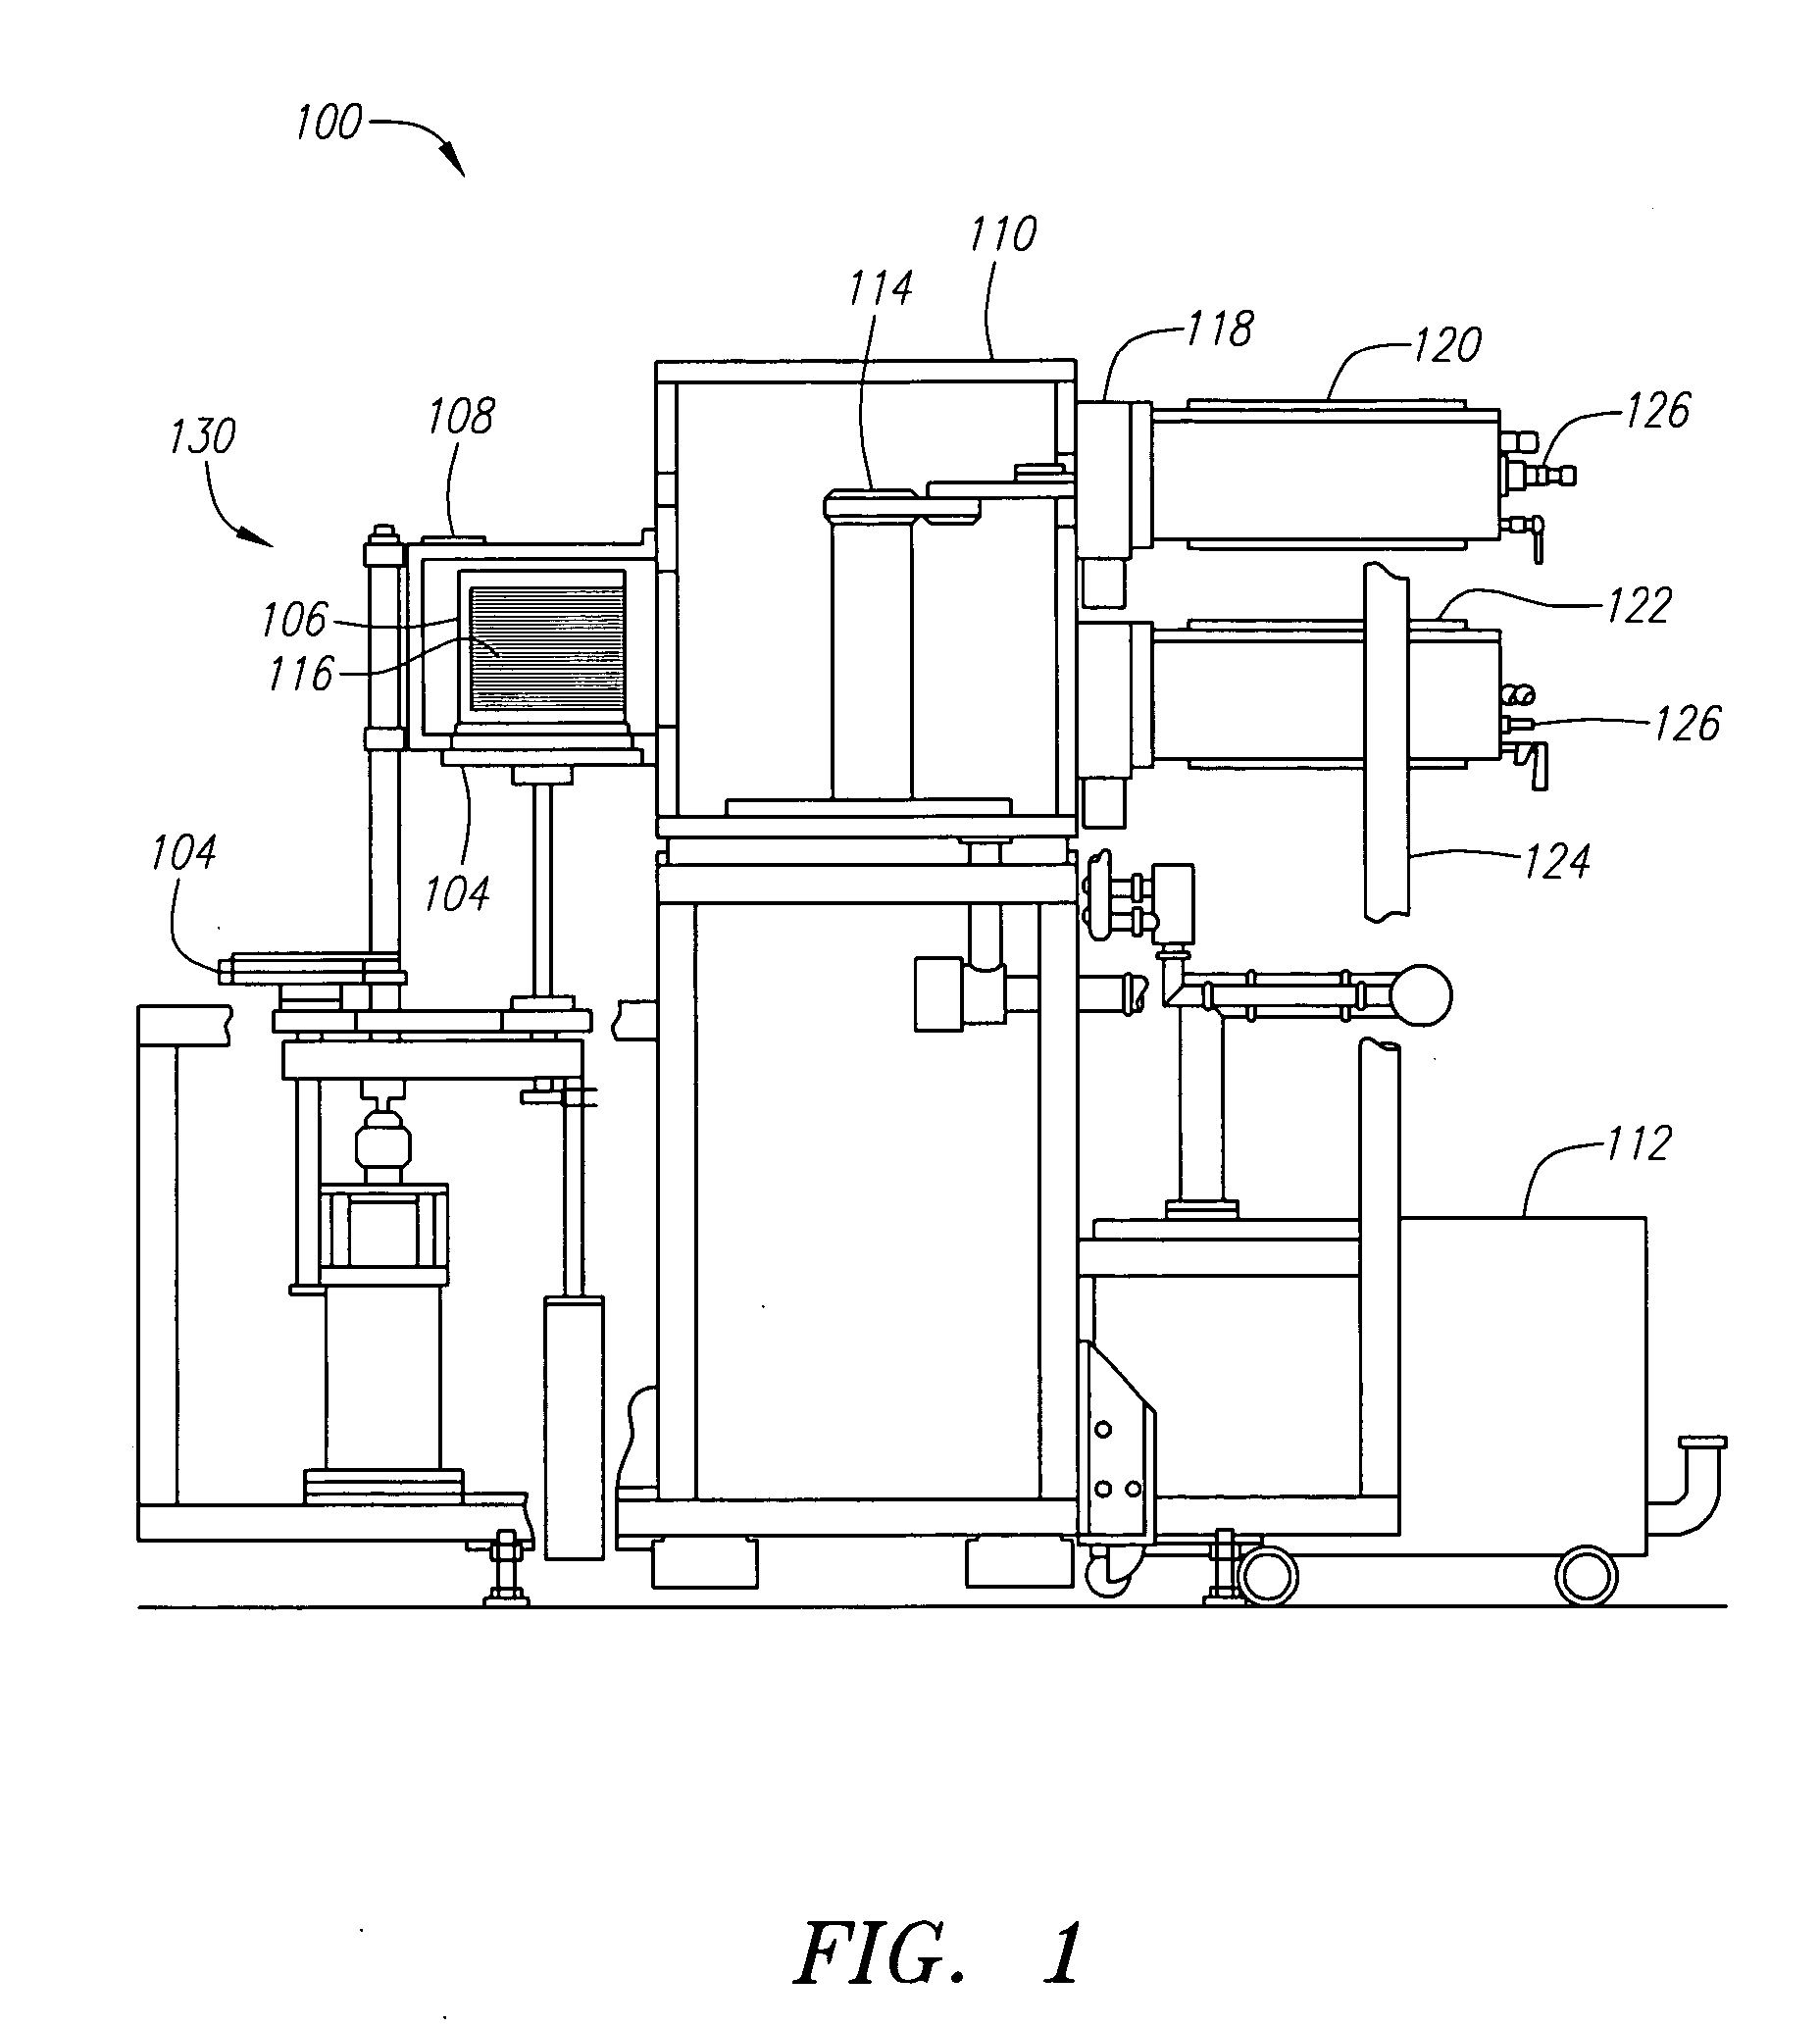 Method of making a vertical electronic device